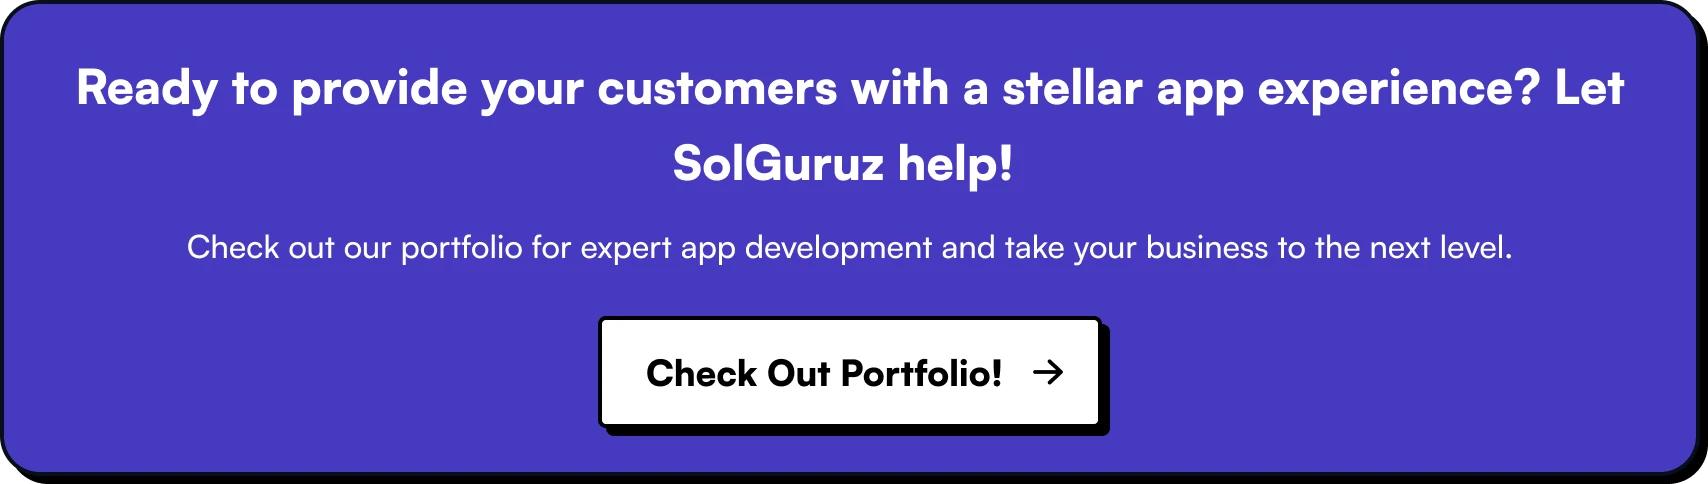 Ready to provide your customers with a stellar app experience - Let SolGuruz help!